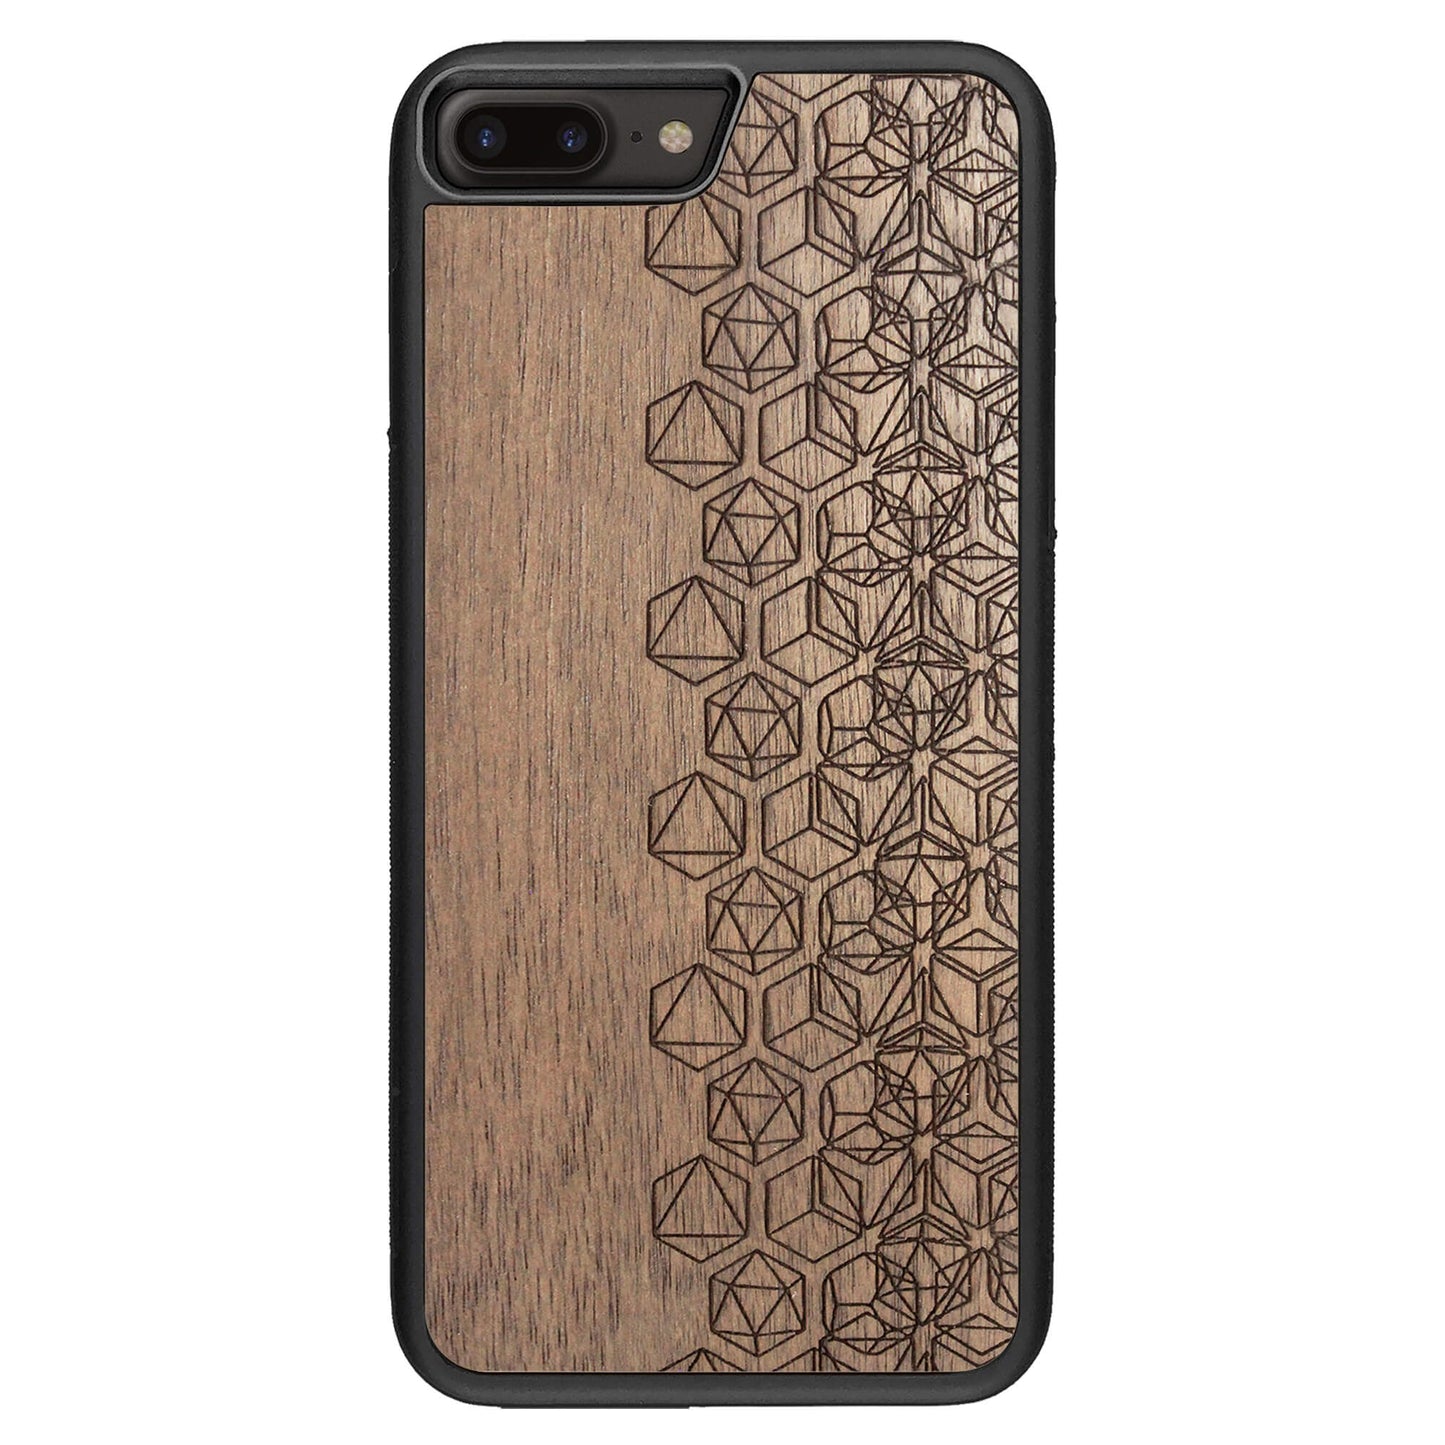 Wooden Case for iPhone 8 Plus Geometric